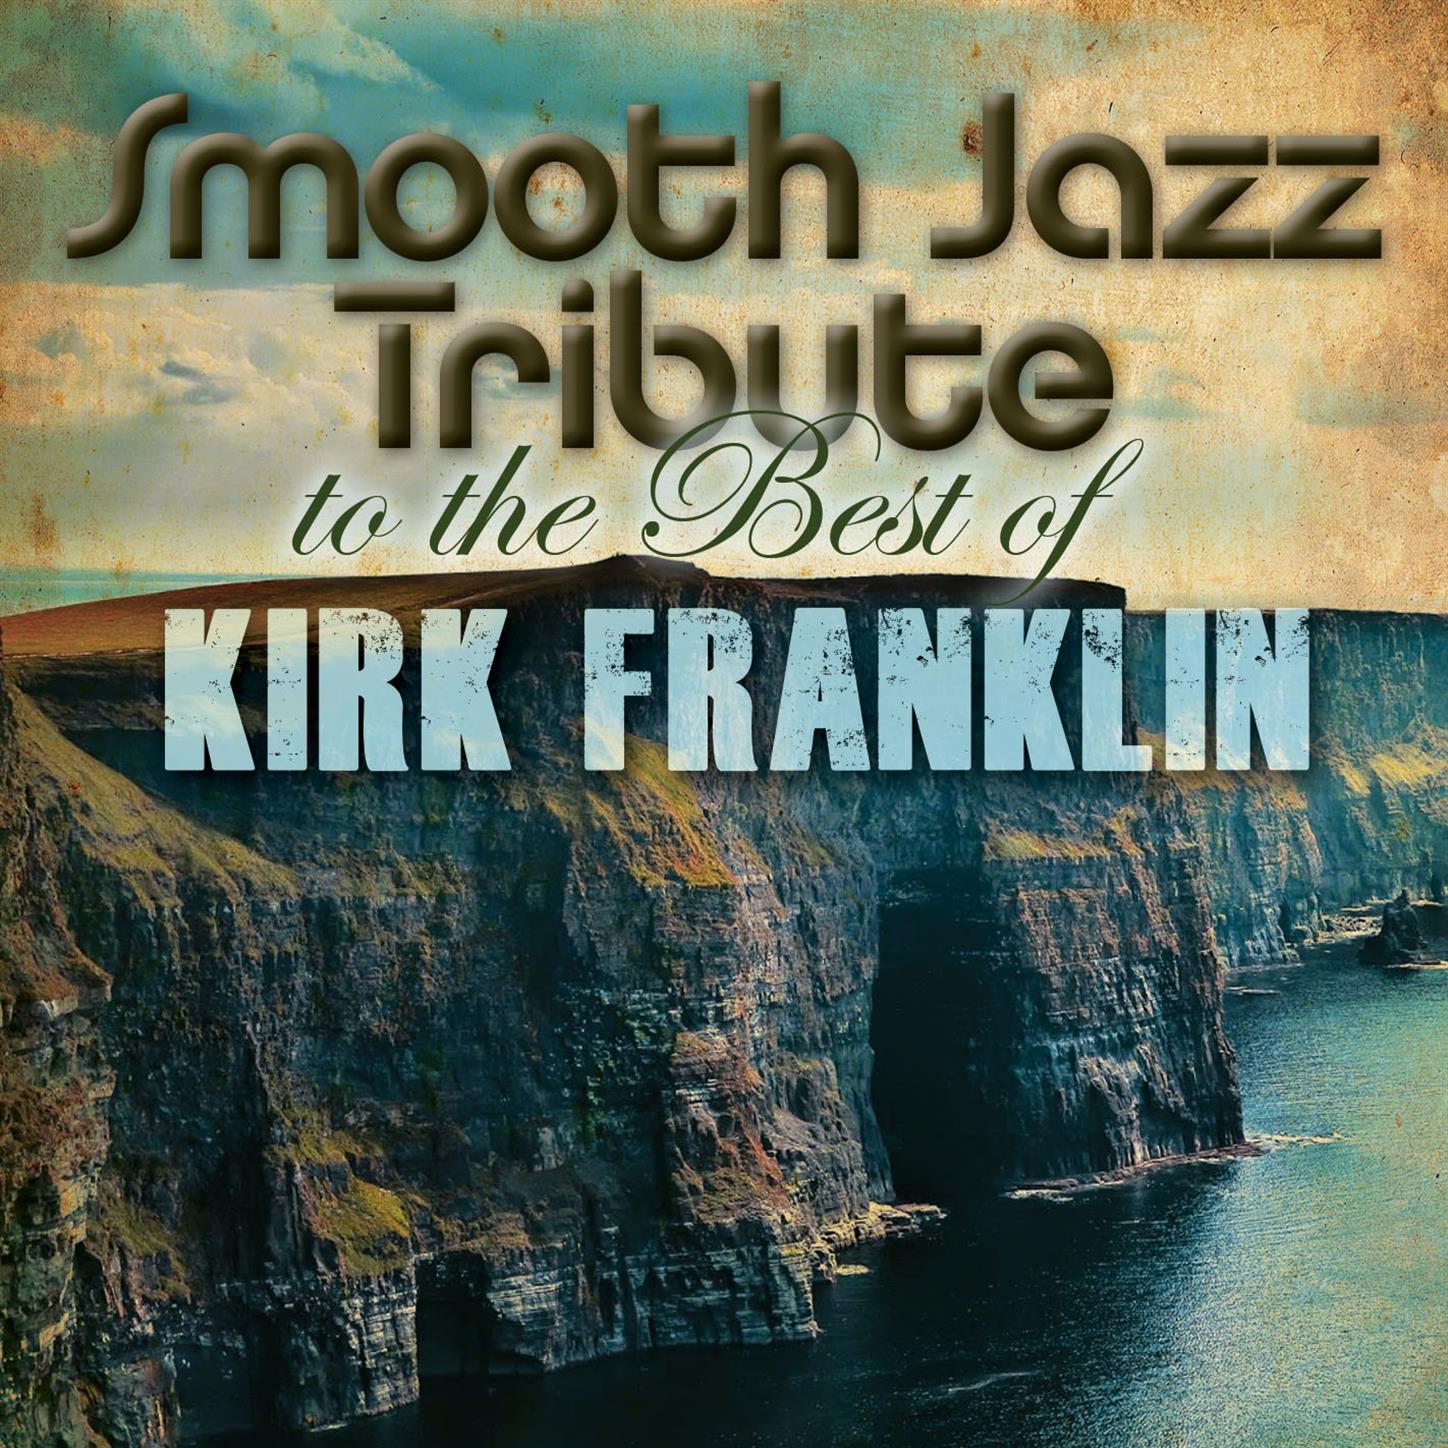 Smooth Jazz Tribute to The Best of Kirk Franklin